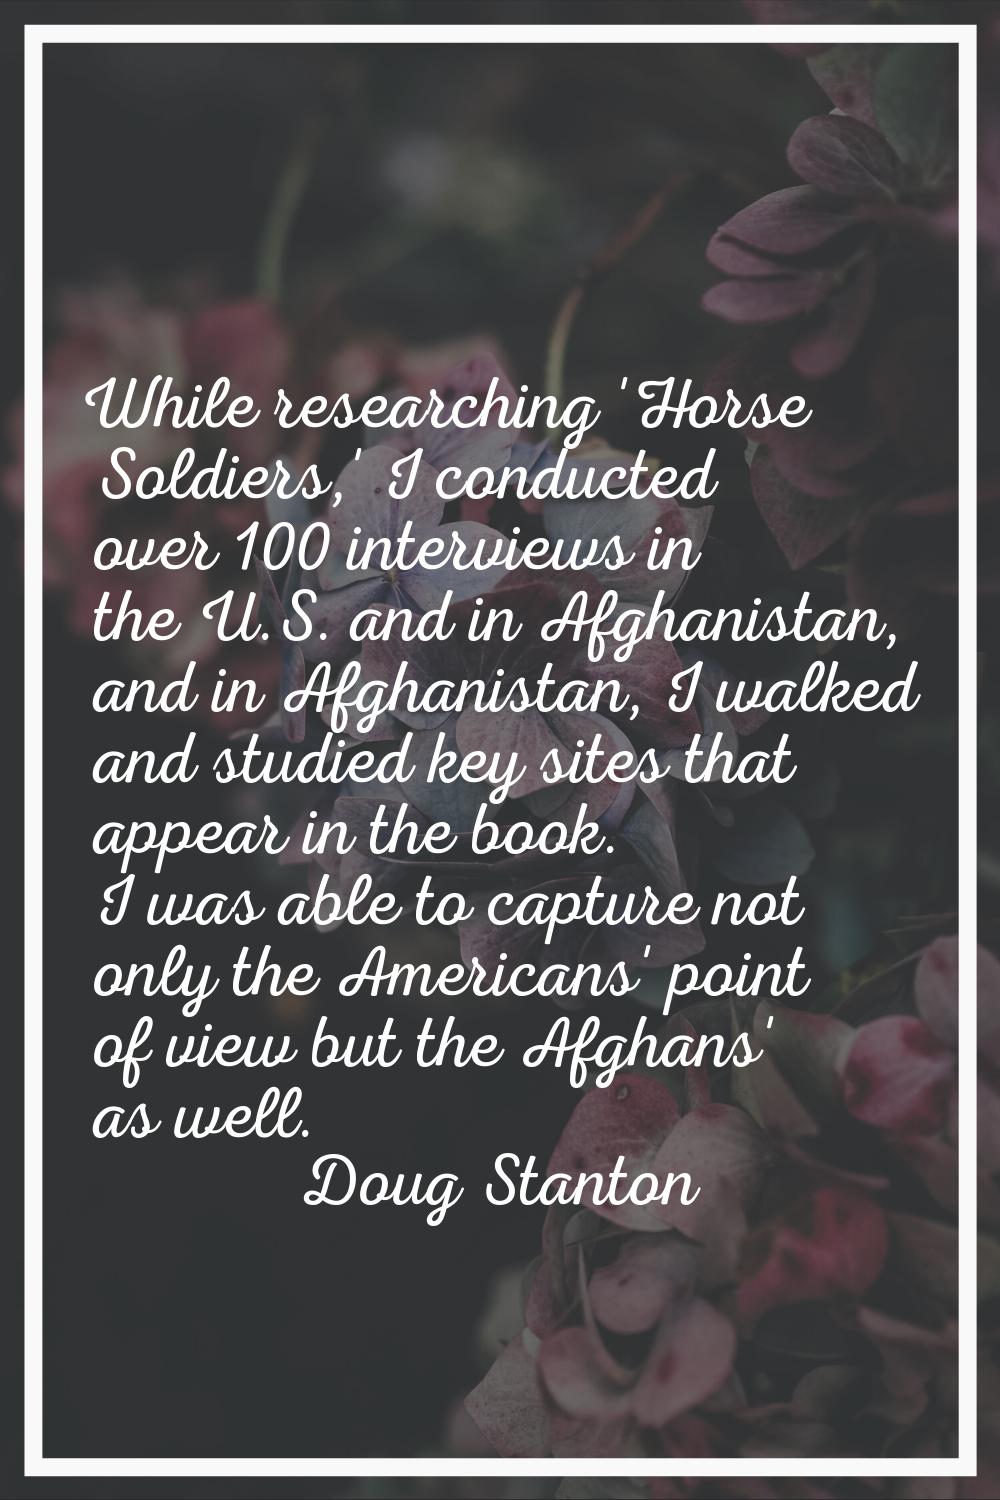 While researching 'Horse Soldiers,' I conducted over 100 interviews in the U.S. and in Afghanistan,